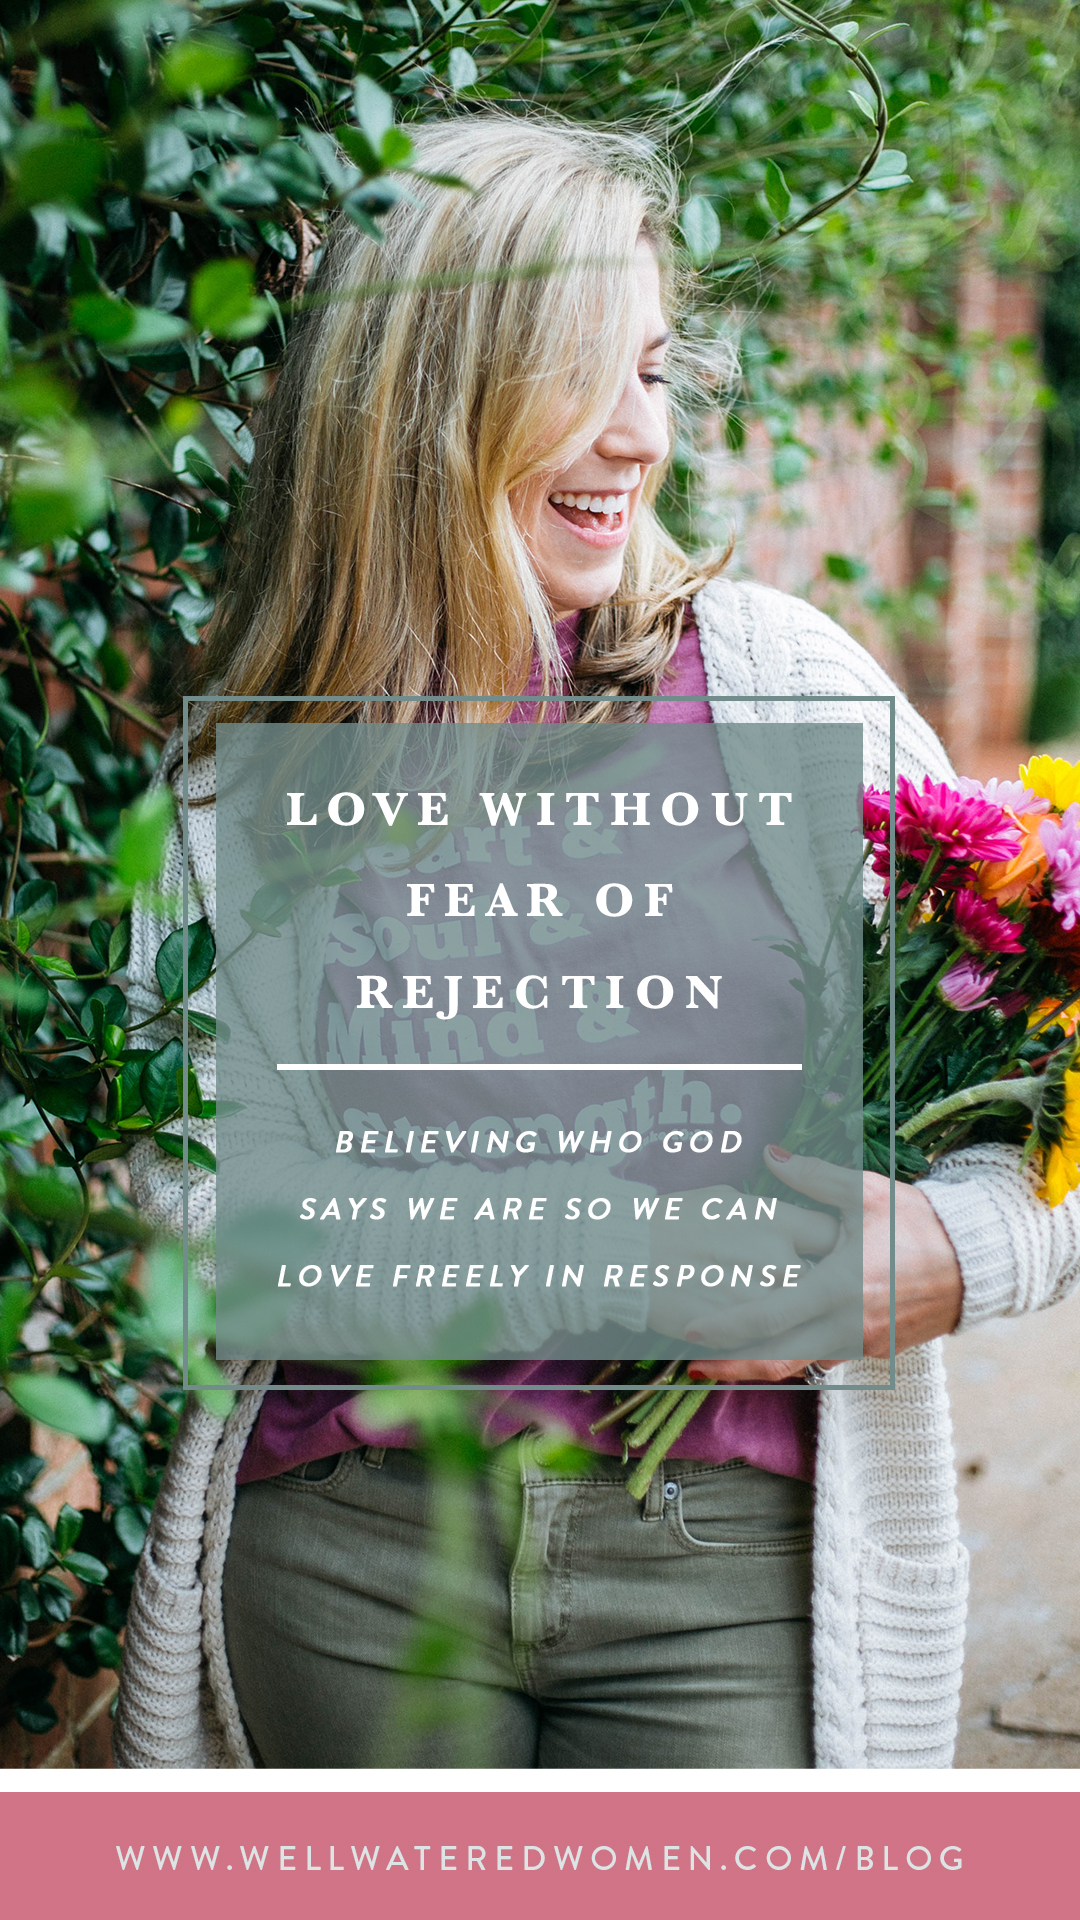 Love without Fear of Rejection: Finding our identity in Christ so that we can love without fear